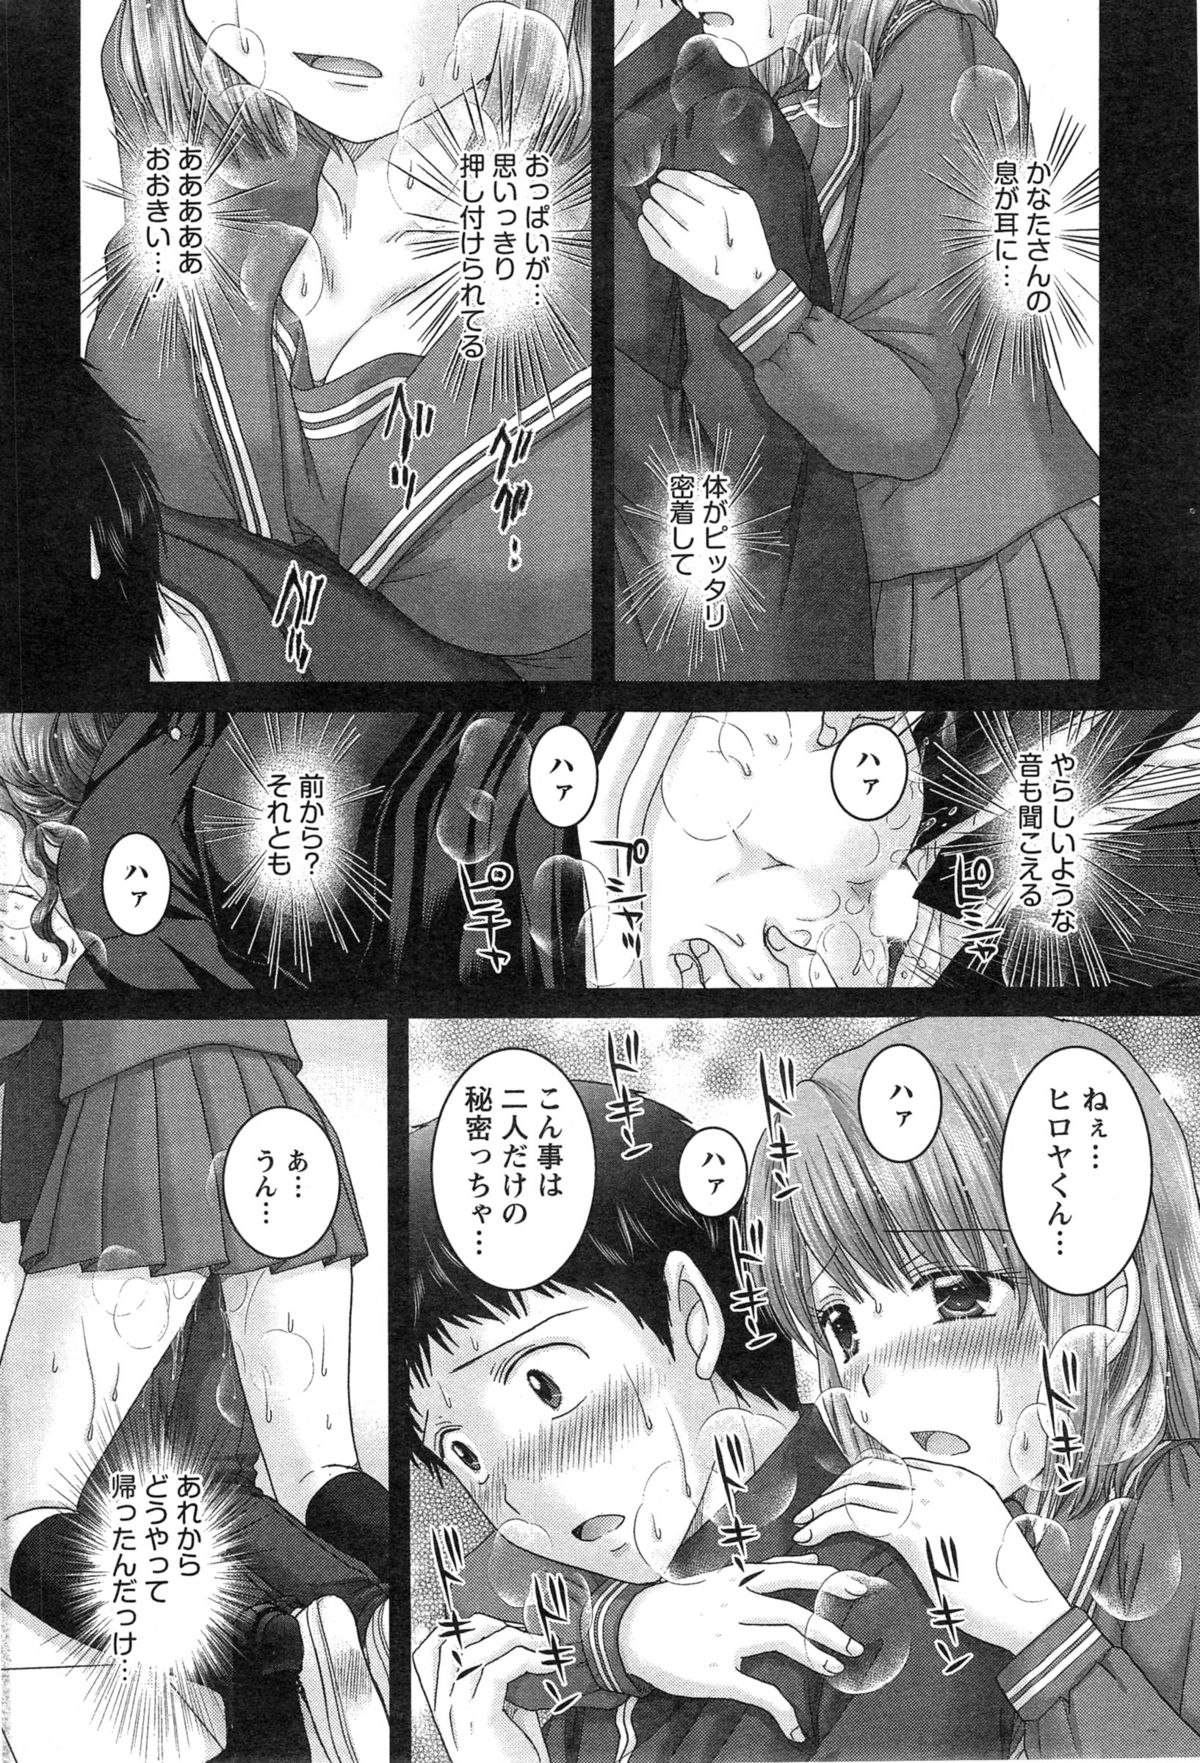 Action Pizazz DX 2015-03 page 50 full